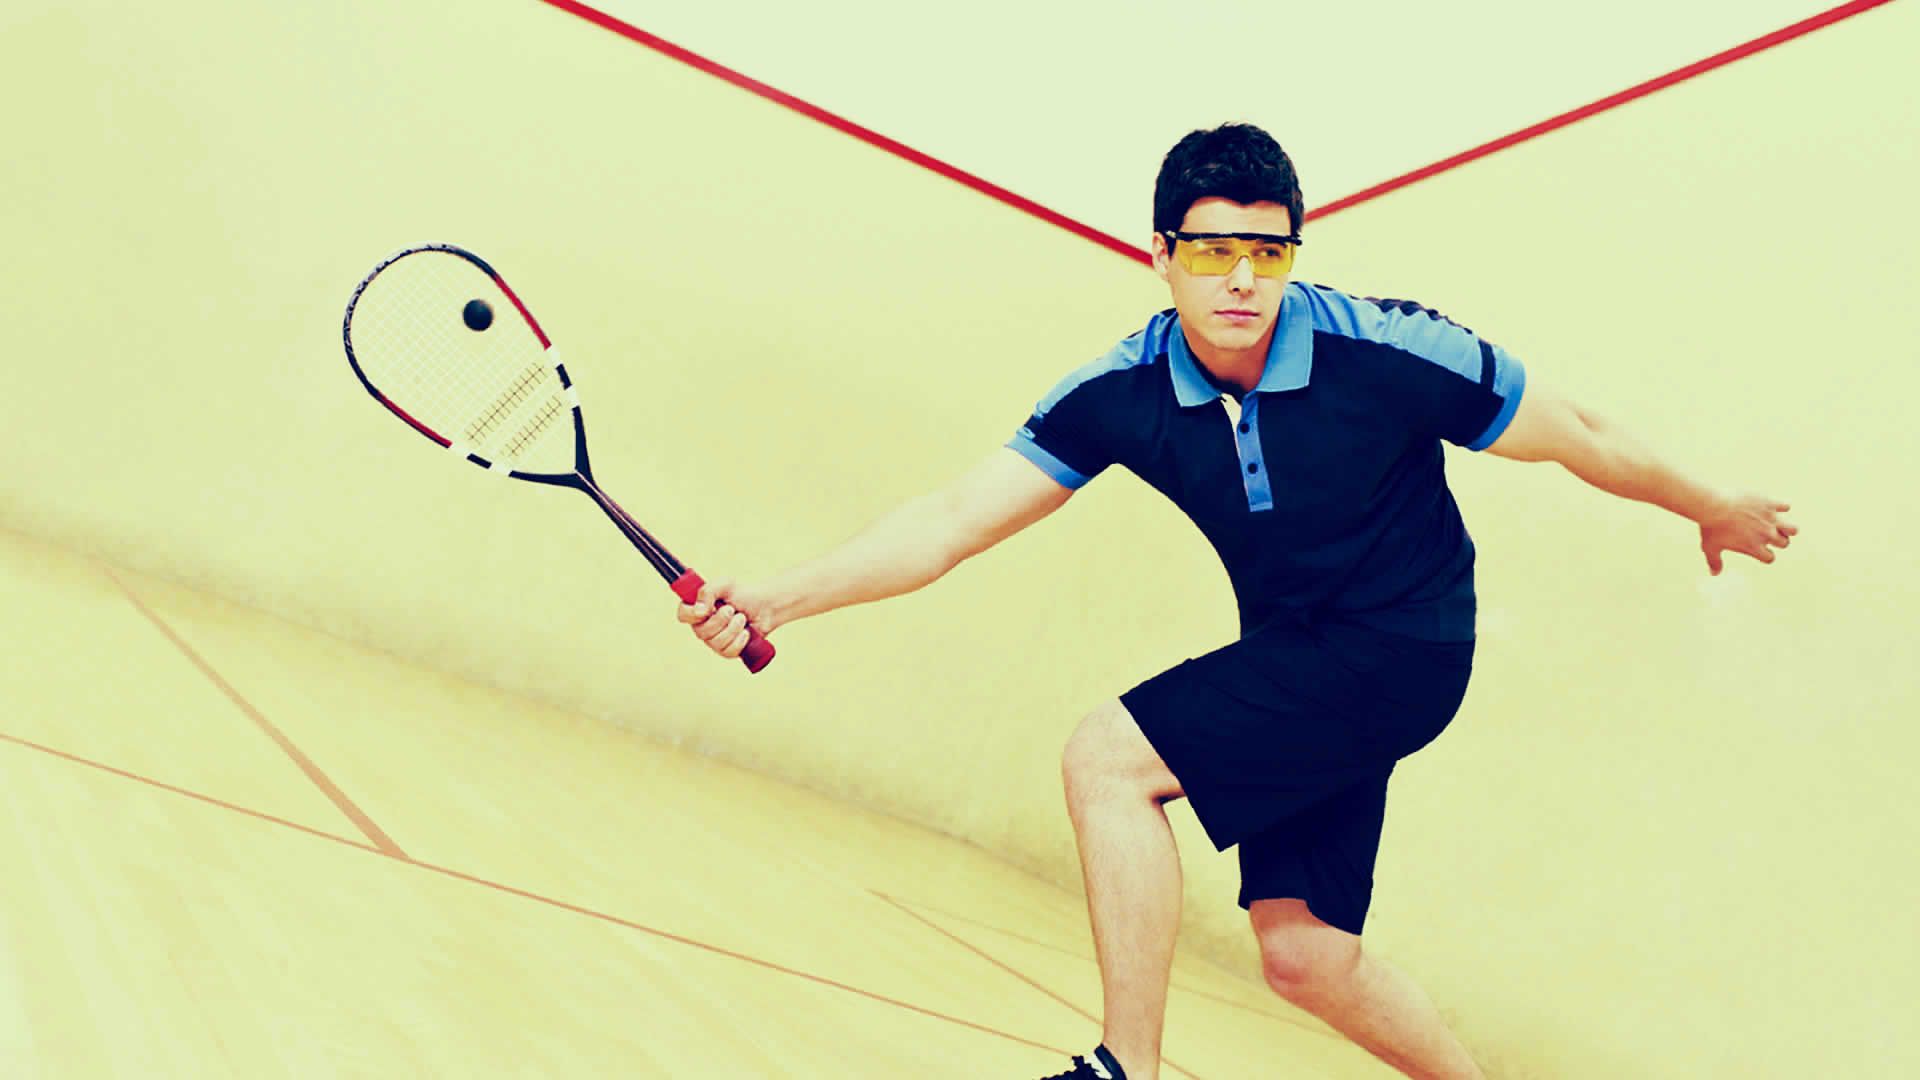 A Sport That Heals You: 5 Benefits Of Squash That No Other Sport Gives